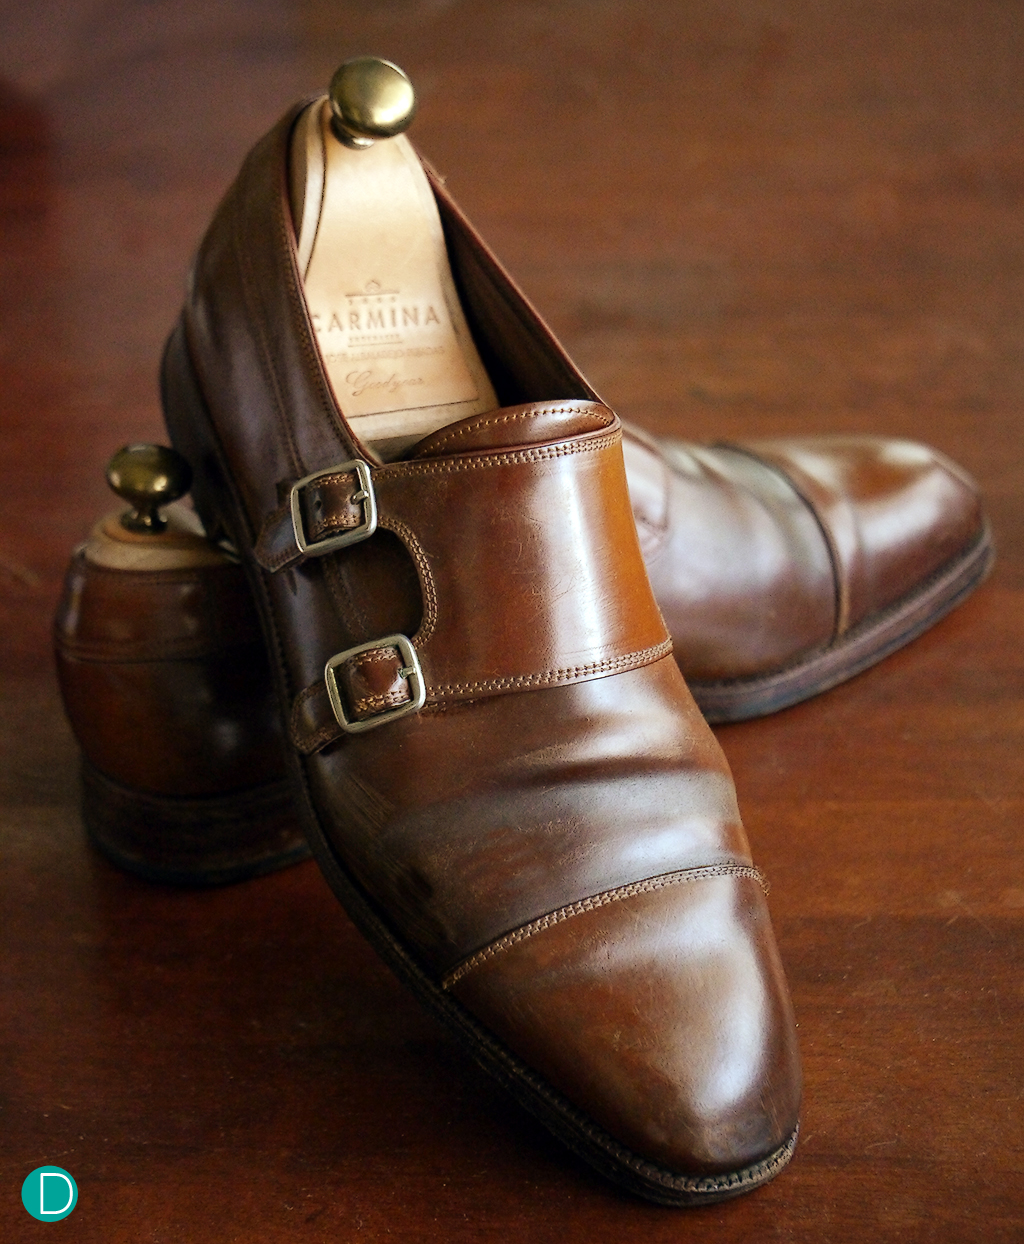 Carmina Double Monk in cordovan. Cordovan is a very strong material made from the membrane of a horse's hinds. The material is stronger, and can take more abuse than regular calf.  Pictured here is the author's own pair, purchased about 8 years ago from the Carmina Boutique in Paris.